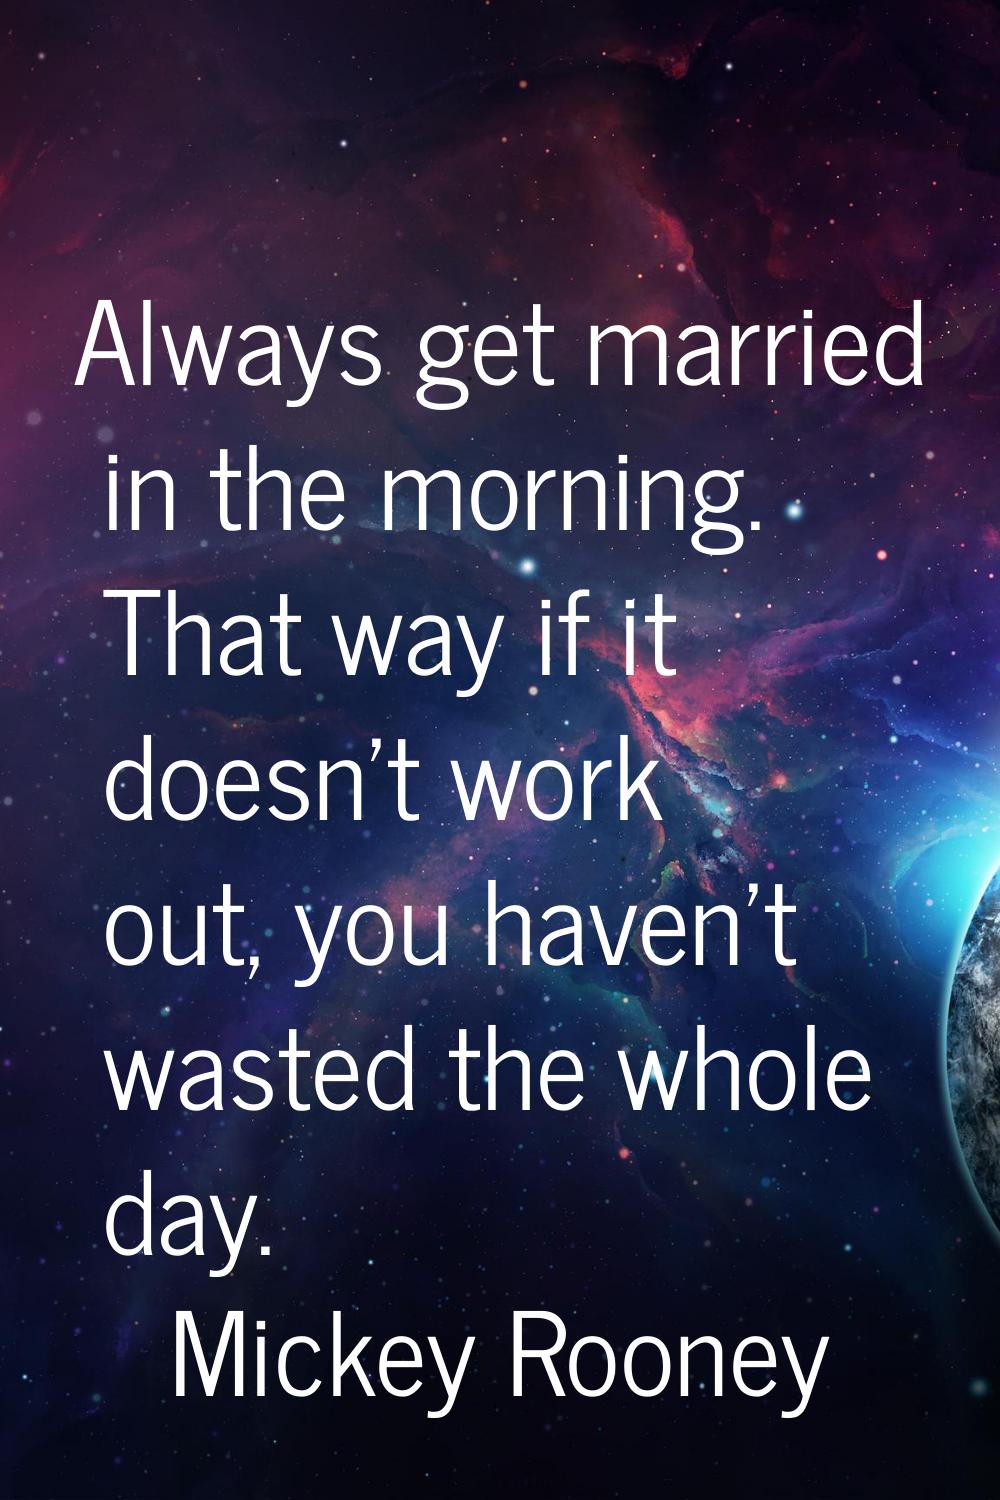 Always get married in the morning. That way if it doesn't work out, you haven't wasted the whole da